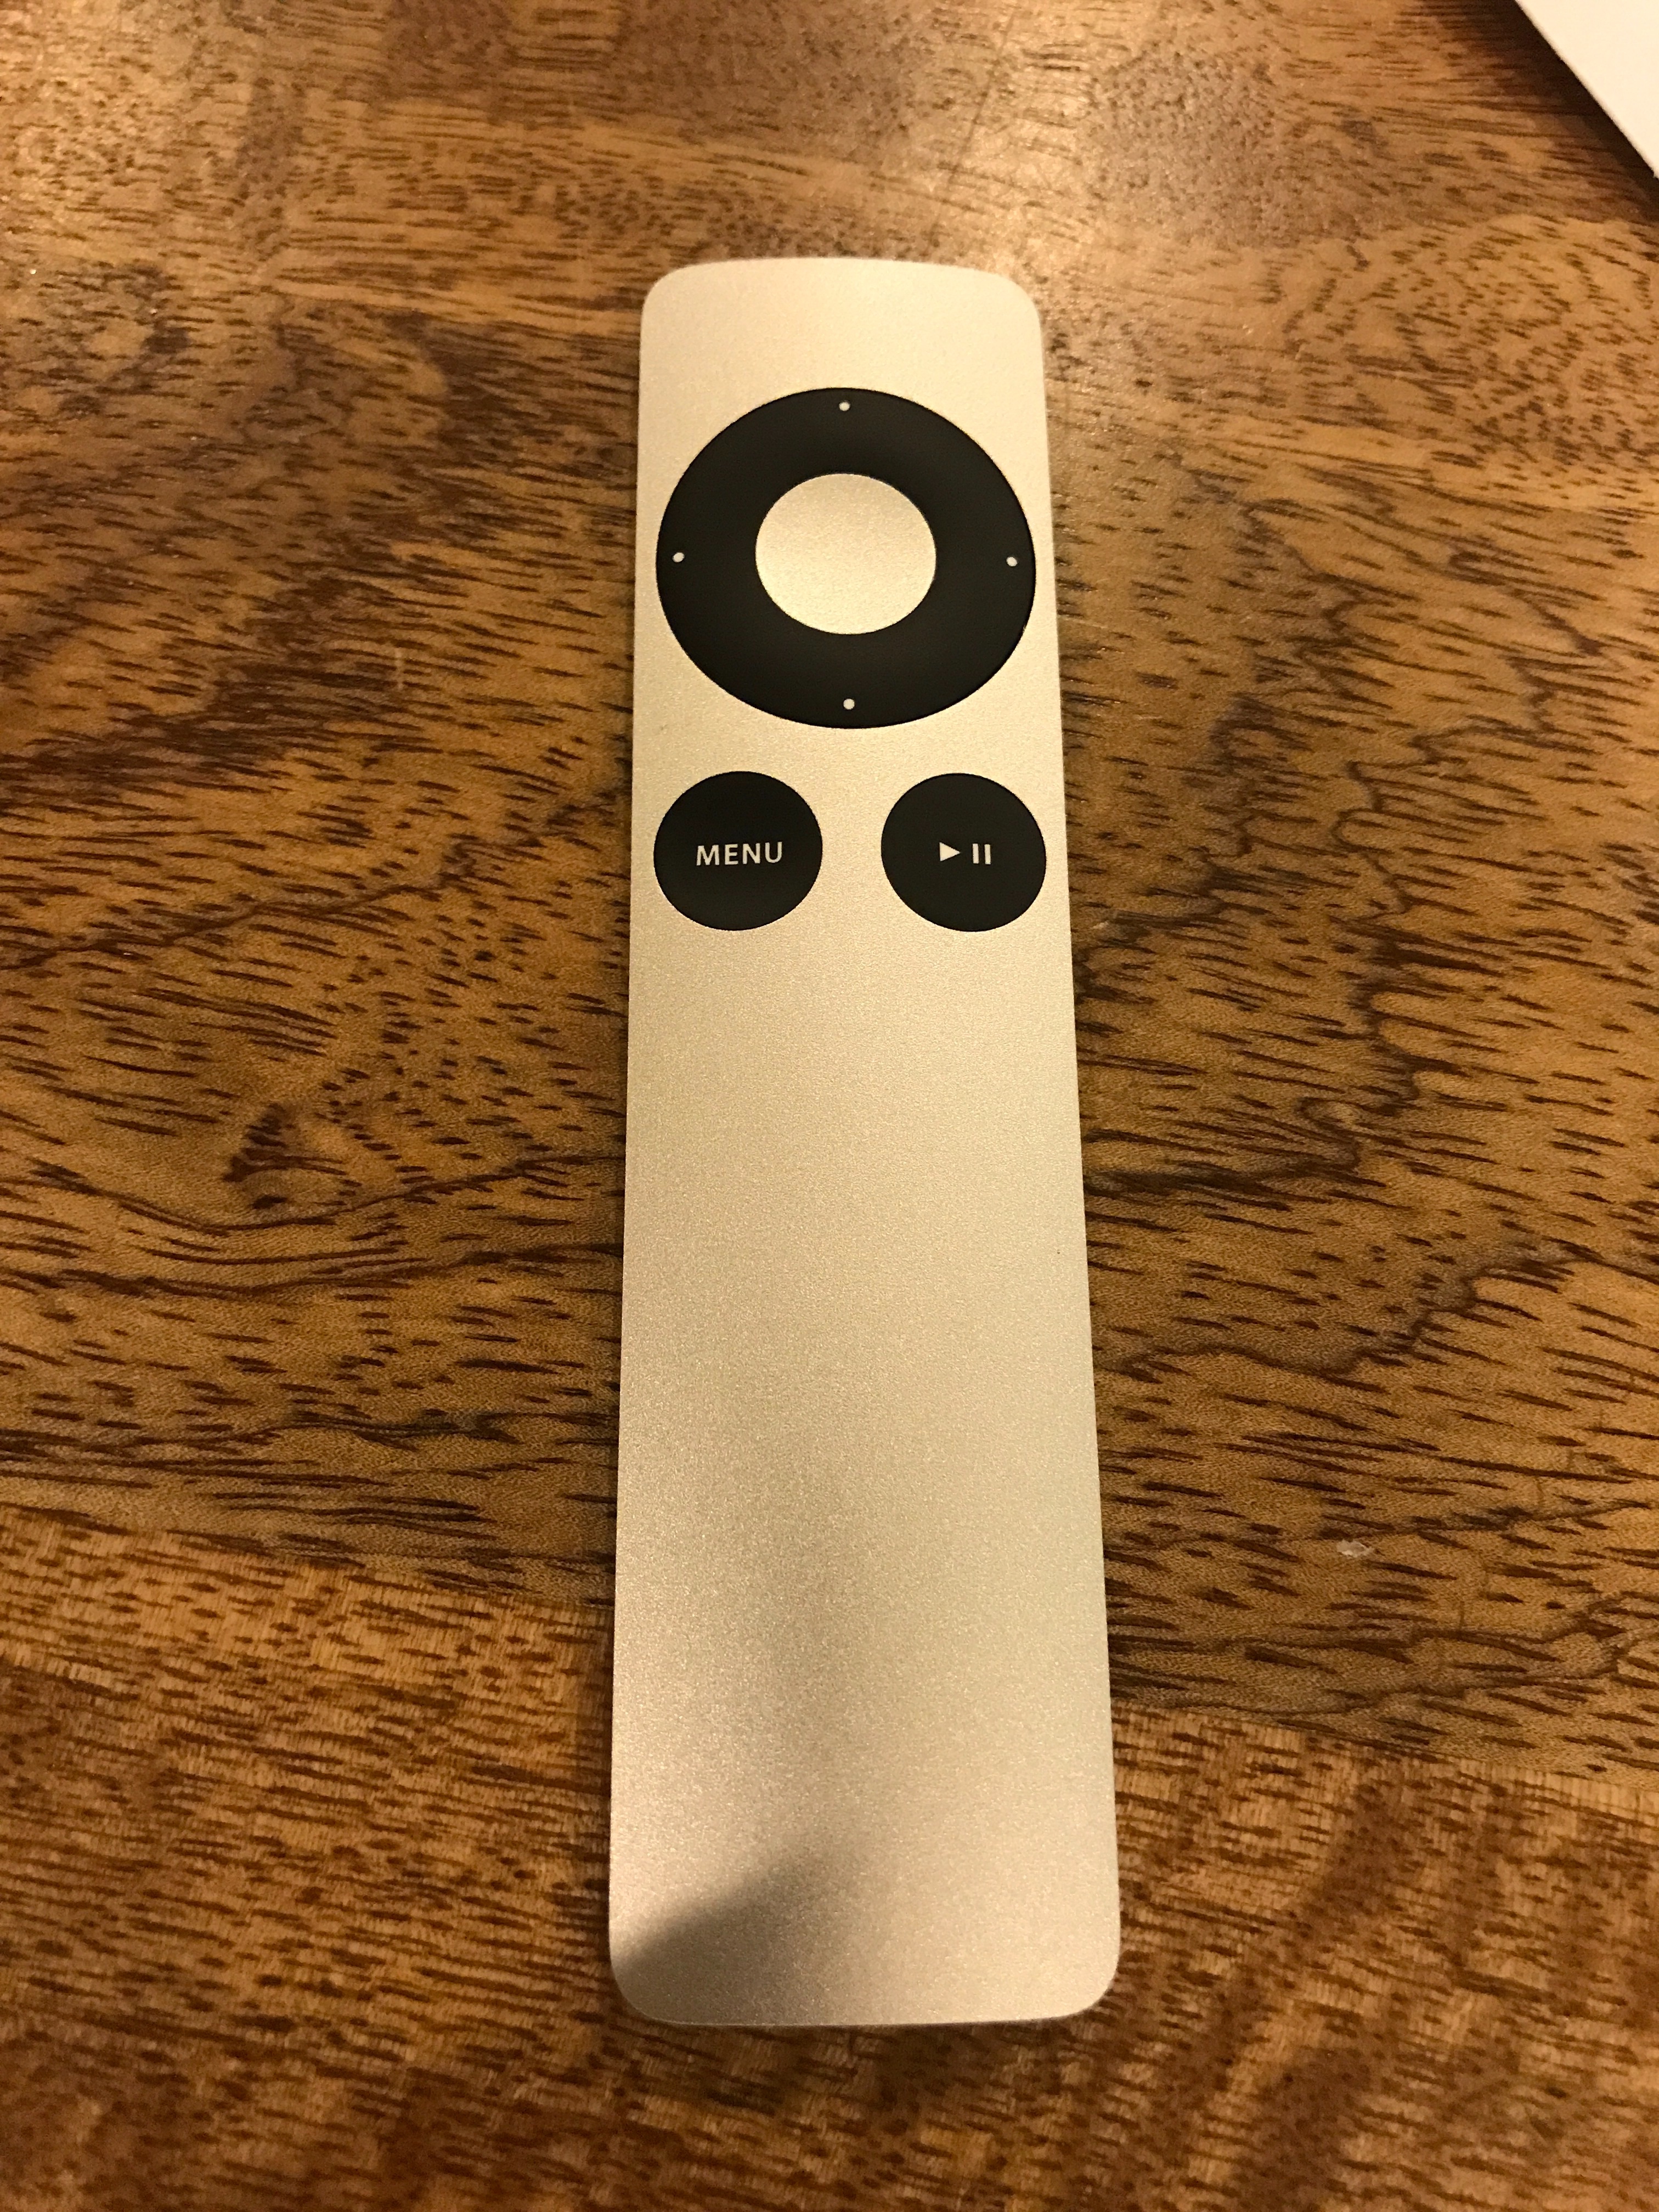 Why is my old Apple TV not working?